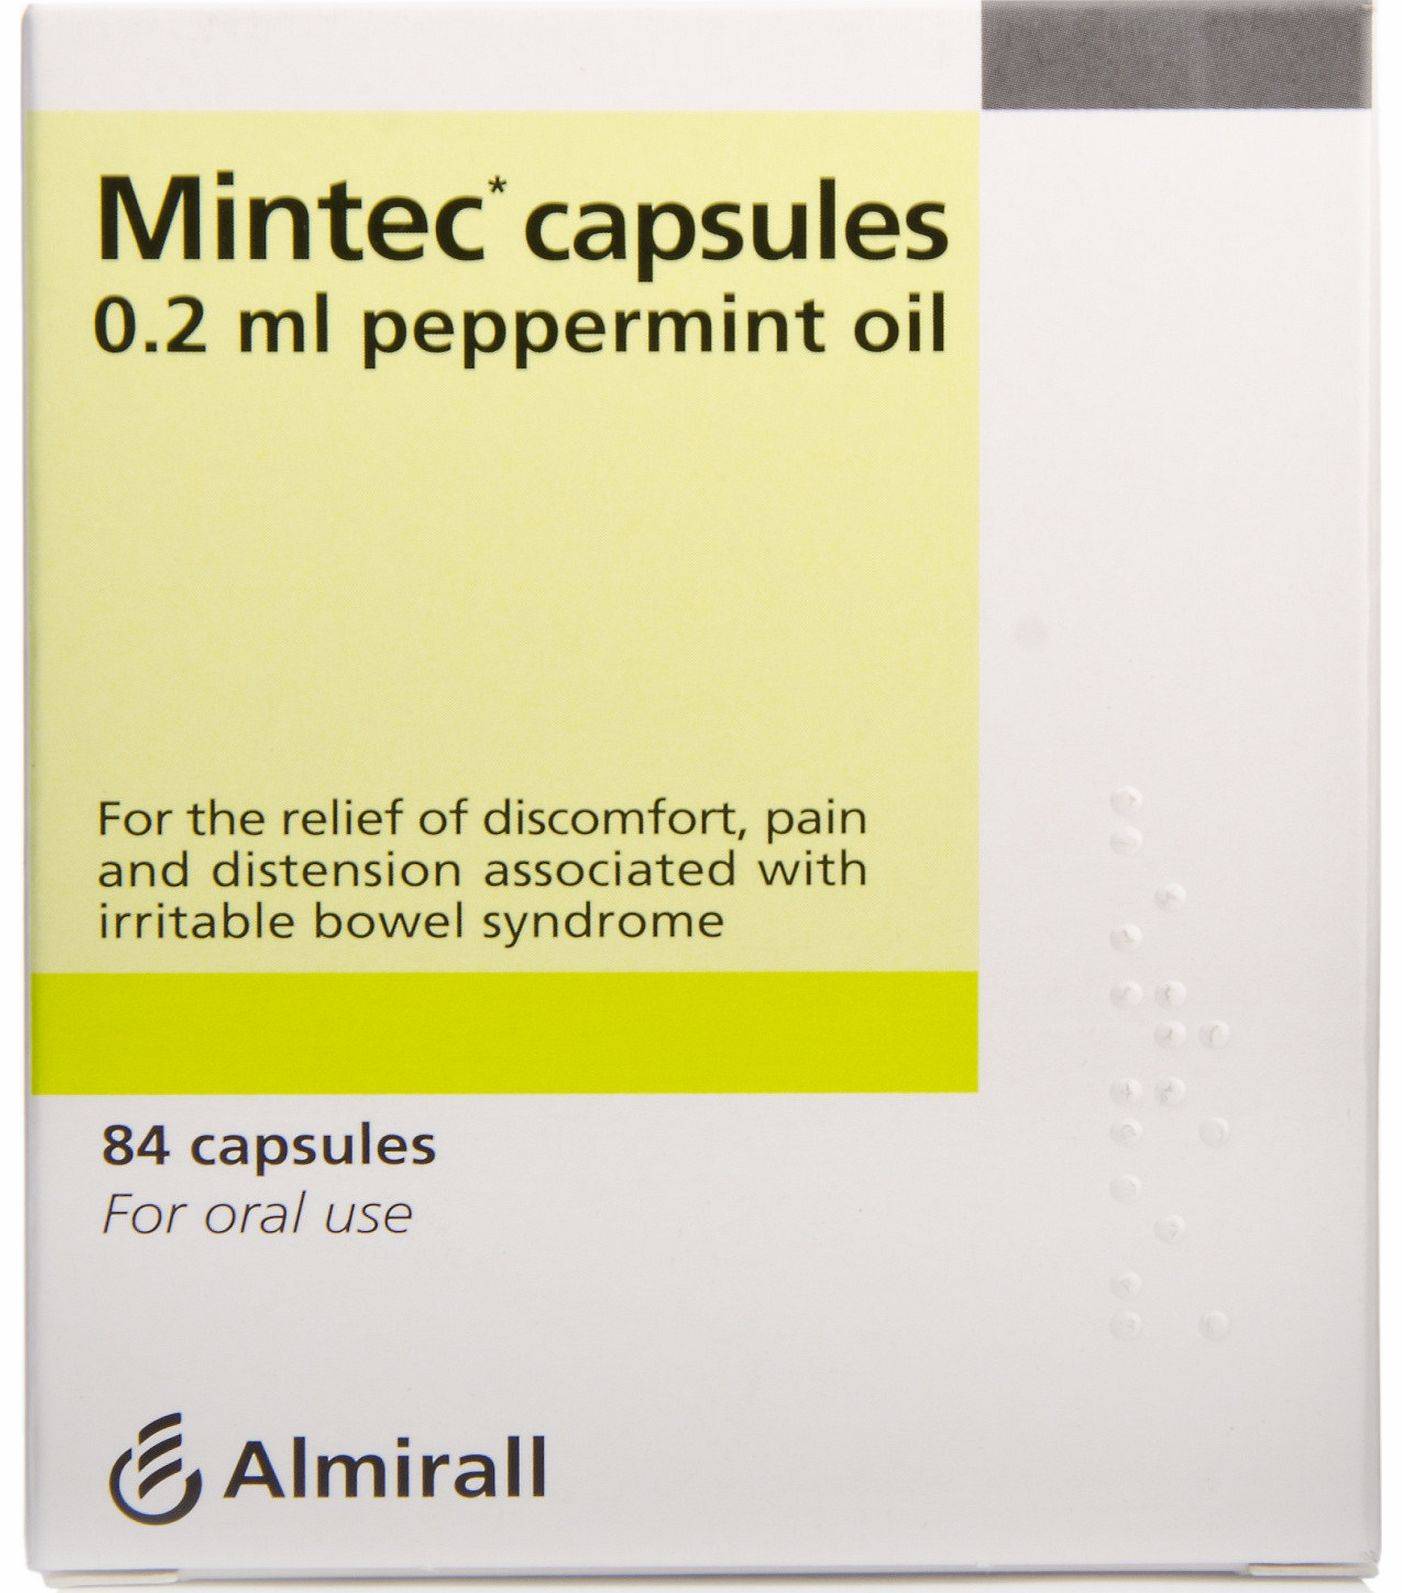 Mintec Cap is formulated to help you relieve unpleasant symptoms of irritable bowel syndrome (IBS) as it contains a soothing oil extracted from the peppermint plant; it works to relax spasm in the muscle of the bowel wall and helps restore normal bow